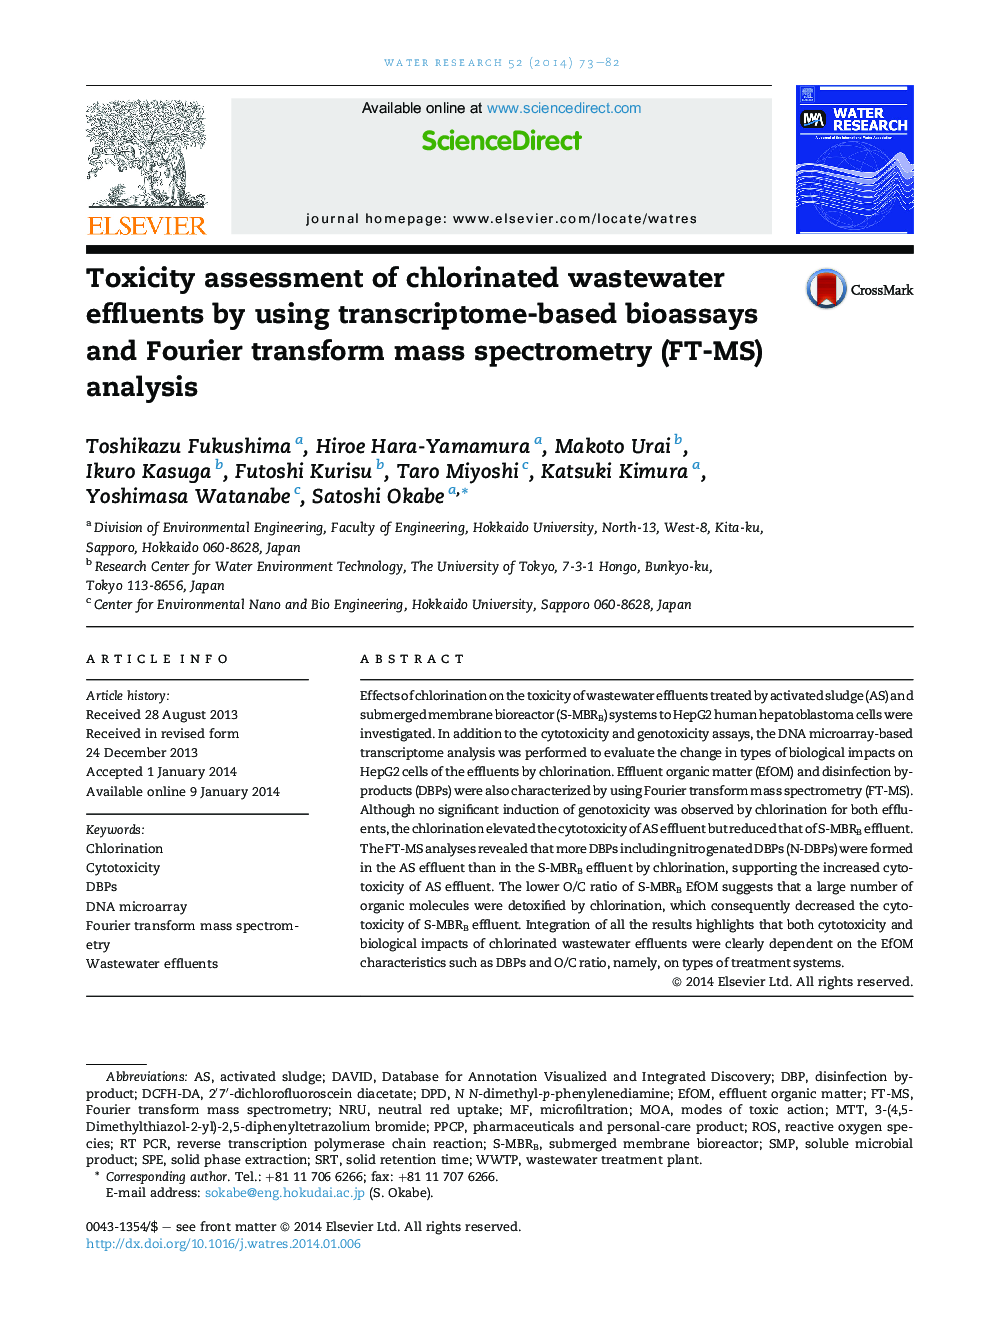 Toxicity assessment of chlorinated wastewater effluents by using transcriptome-based bioassays and Fourier transform mass spectrometry (FT-MS) analysis